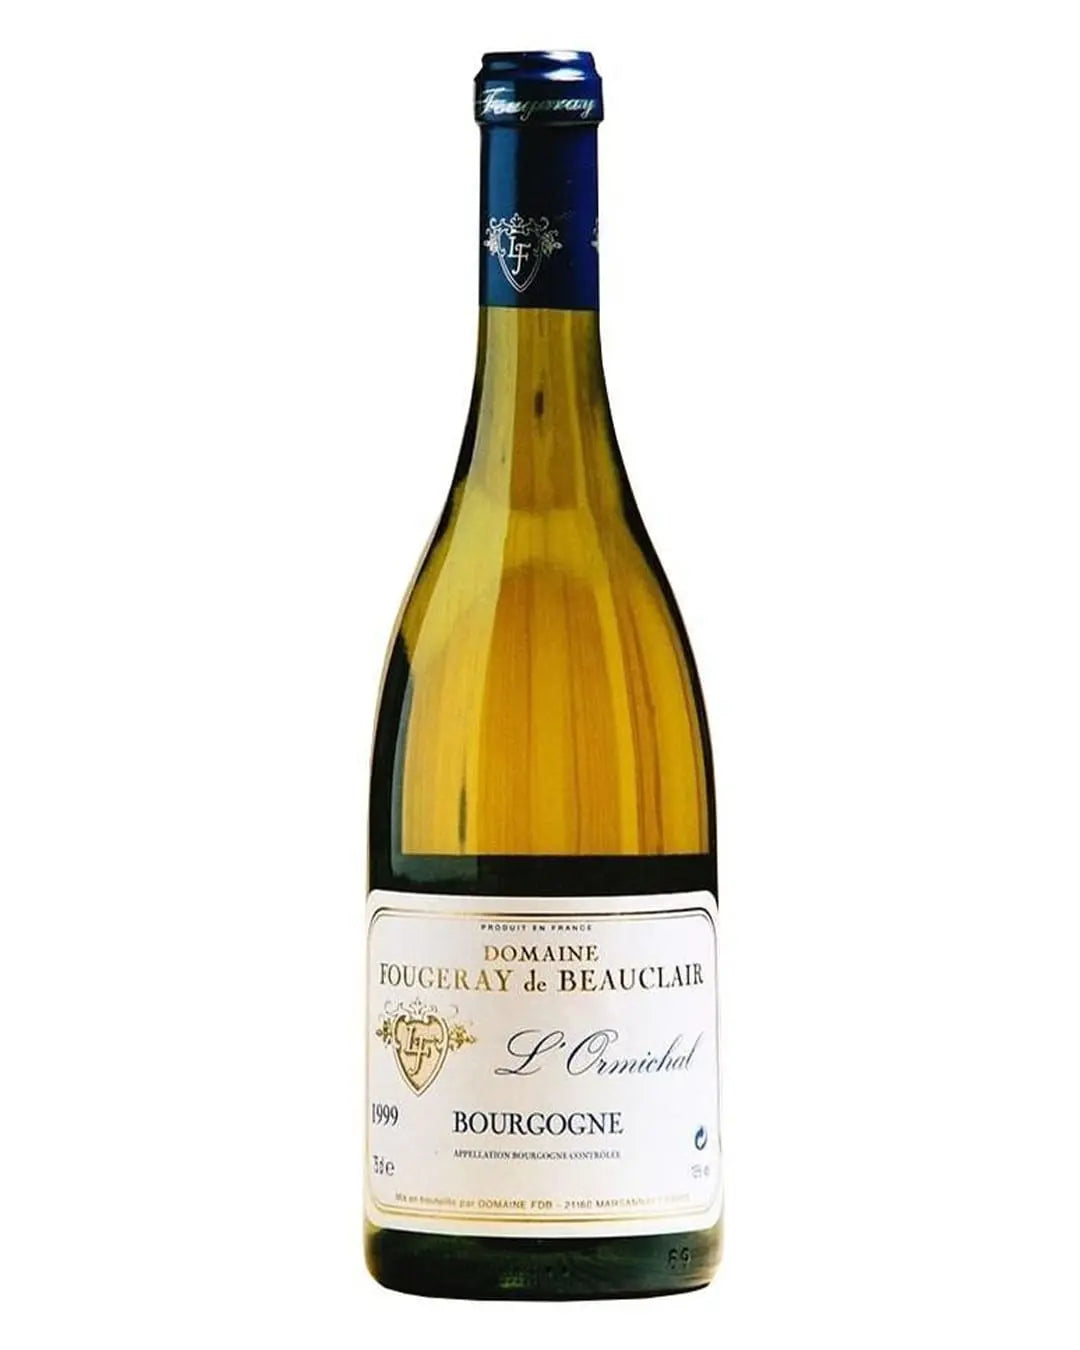 Domaine Fougeray L'Ormichal Bourgogne Blanc, 75 cl White Wine